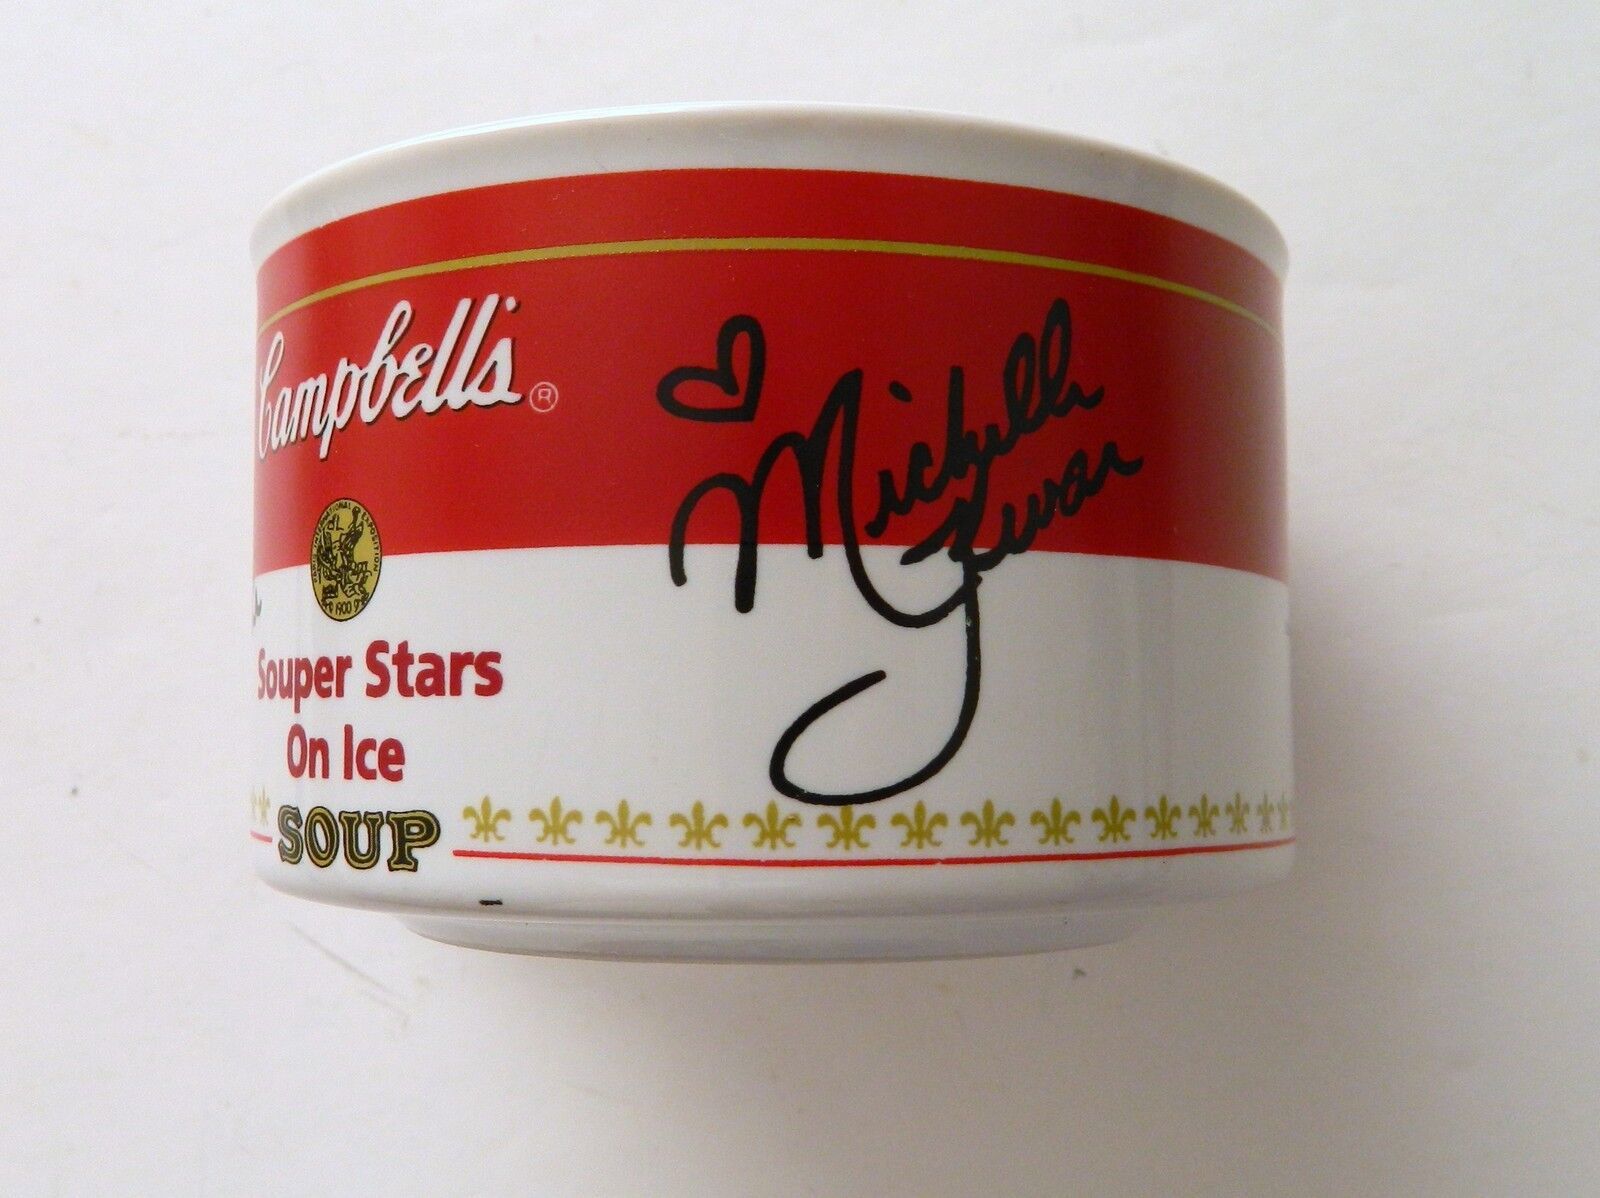 Campbell's Soup Souper Stars on Ice Figure Skating Cup Olympics 1998 Signatures - $12.75